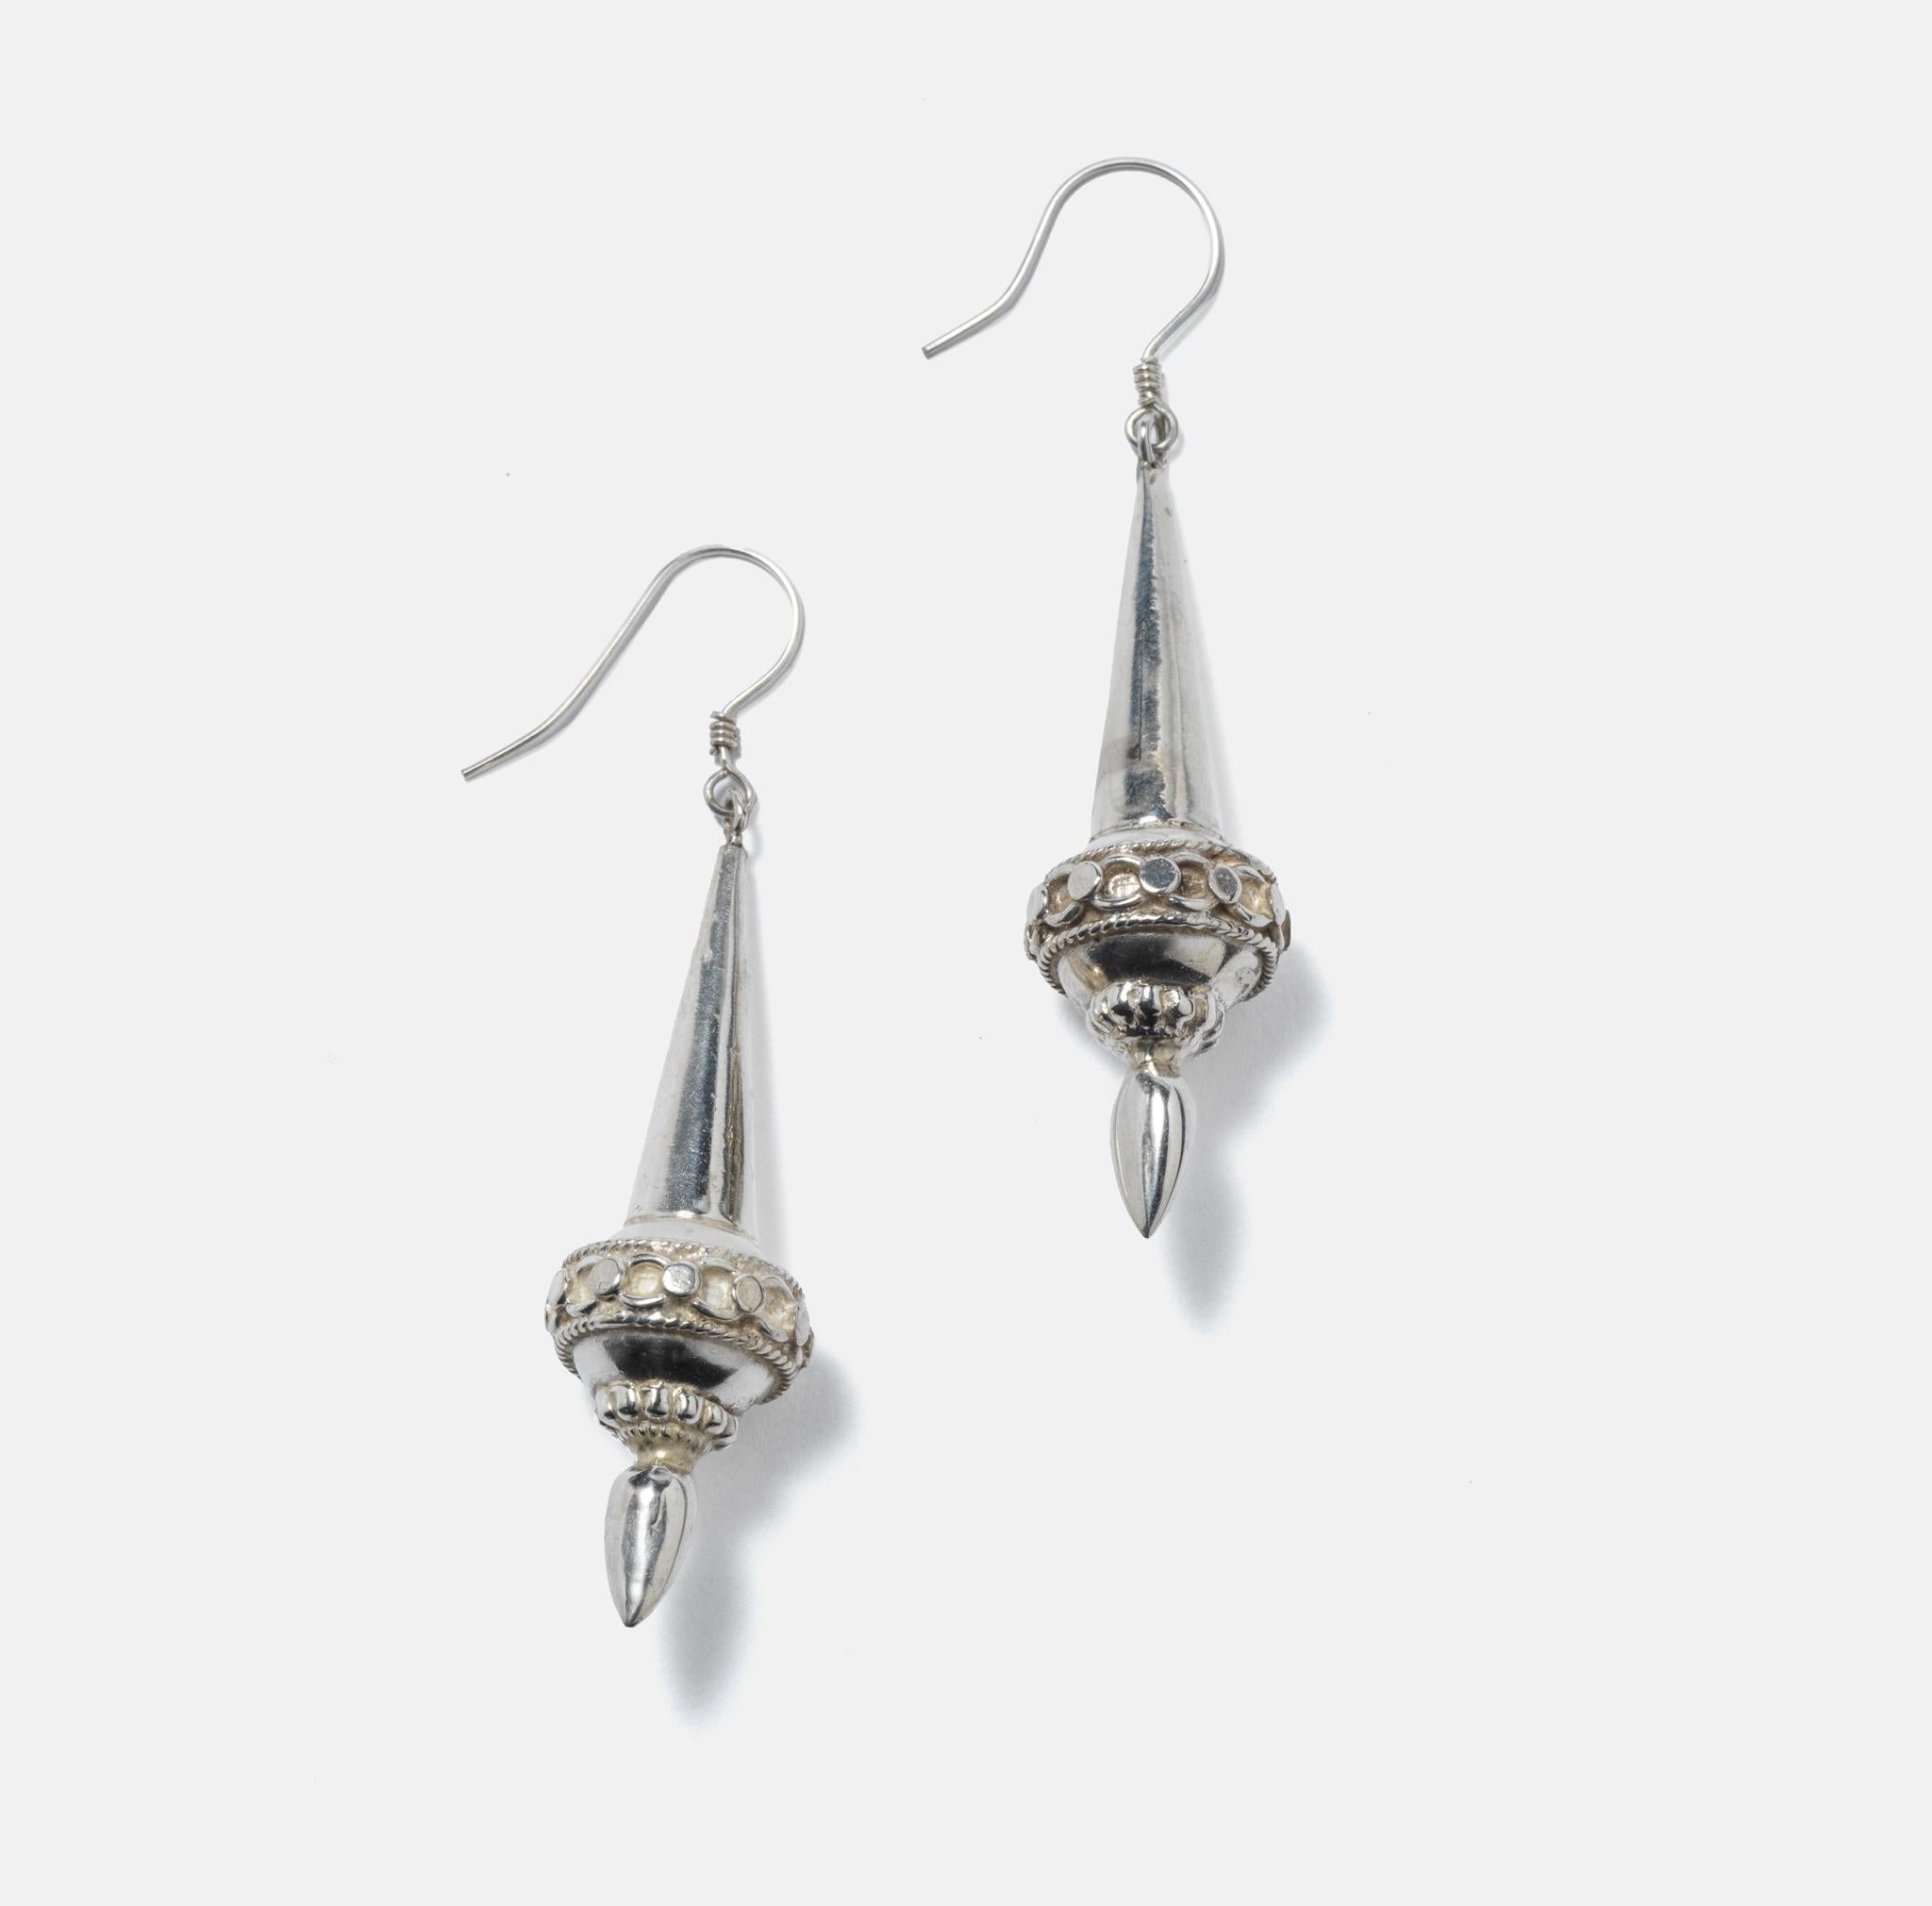 A pair of silver earrings designed almost like Christmas tree decorations. They are hollow ad therefore hang light and easy on your ears.
These are ear rings made in Northern Europe but influenced by Arabic designs. Something like Alladin.
These can